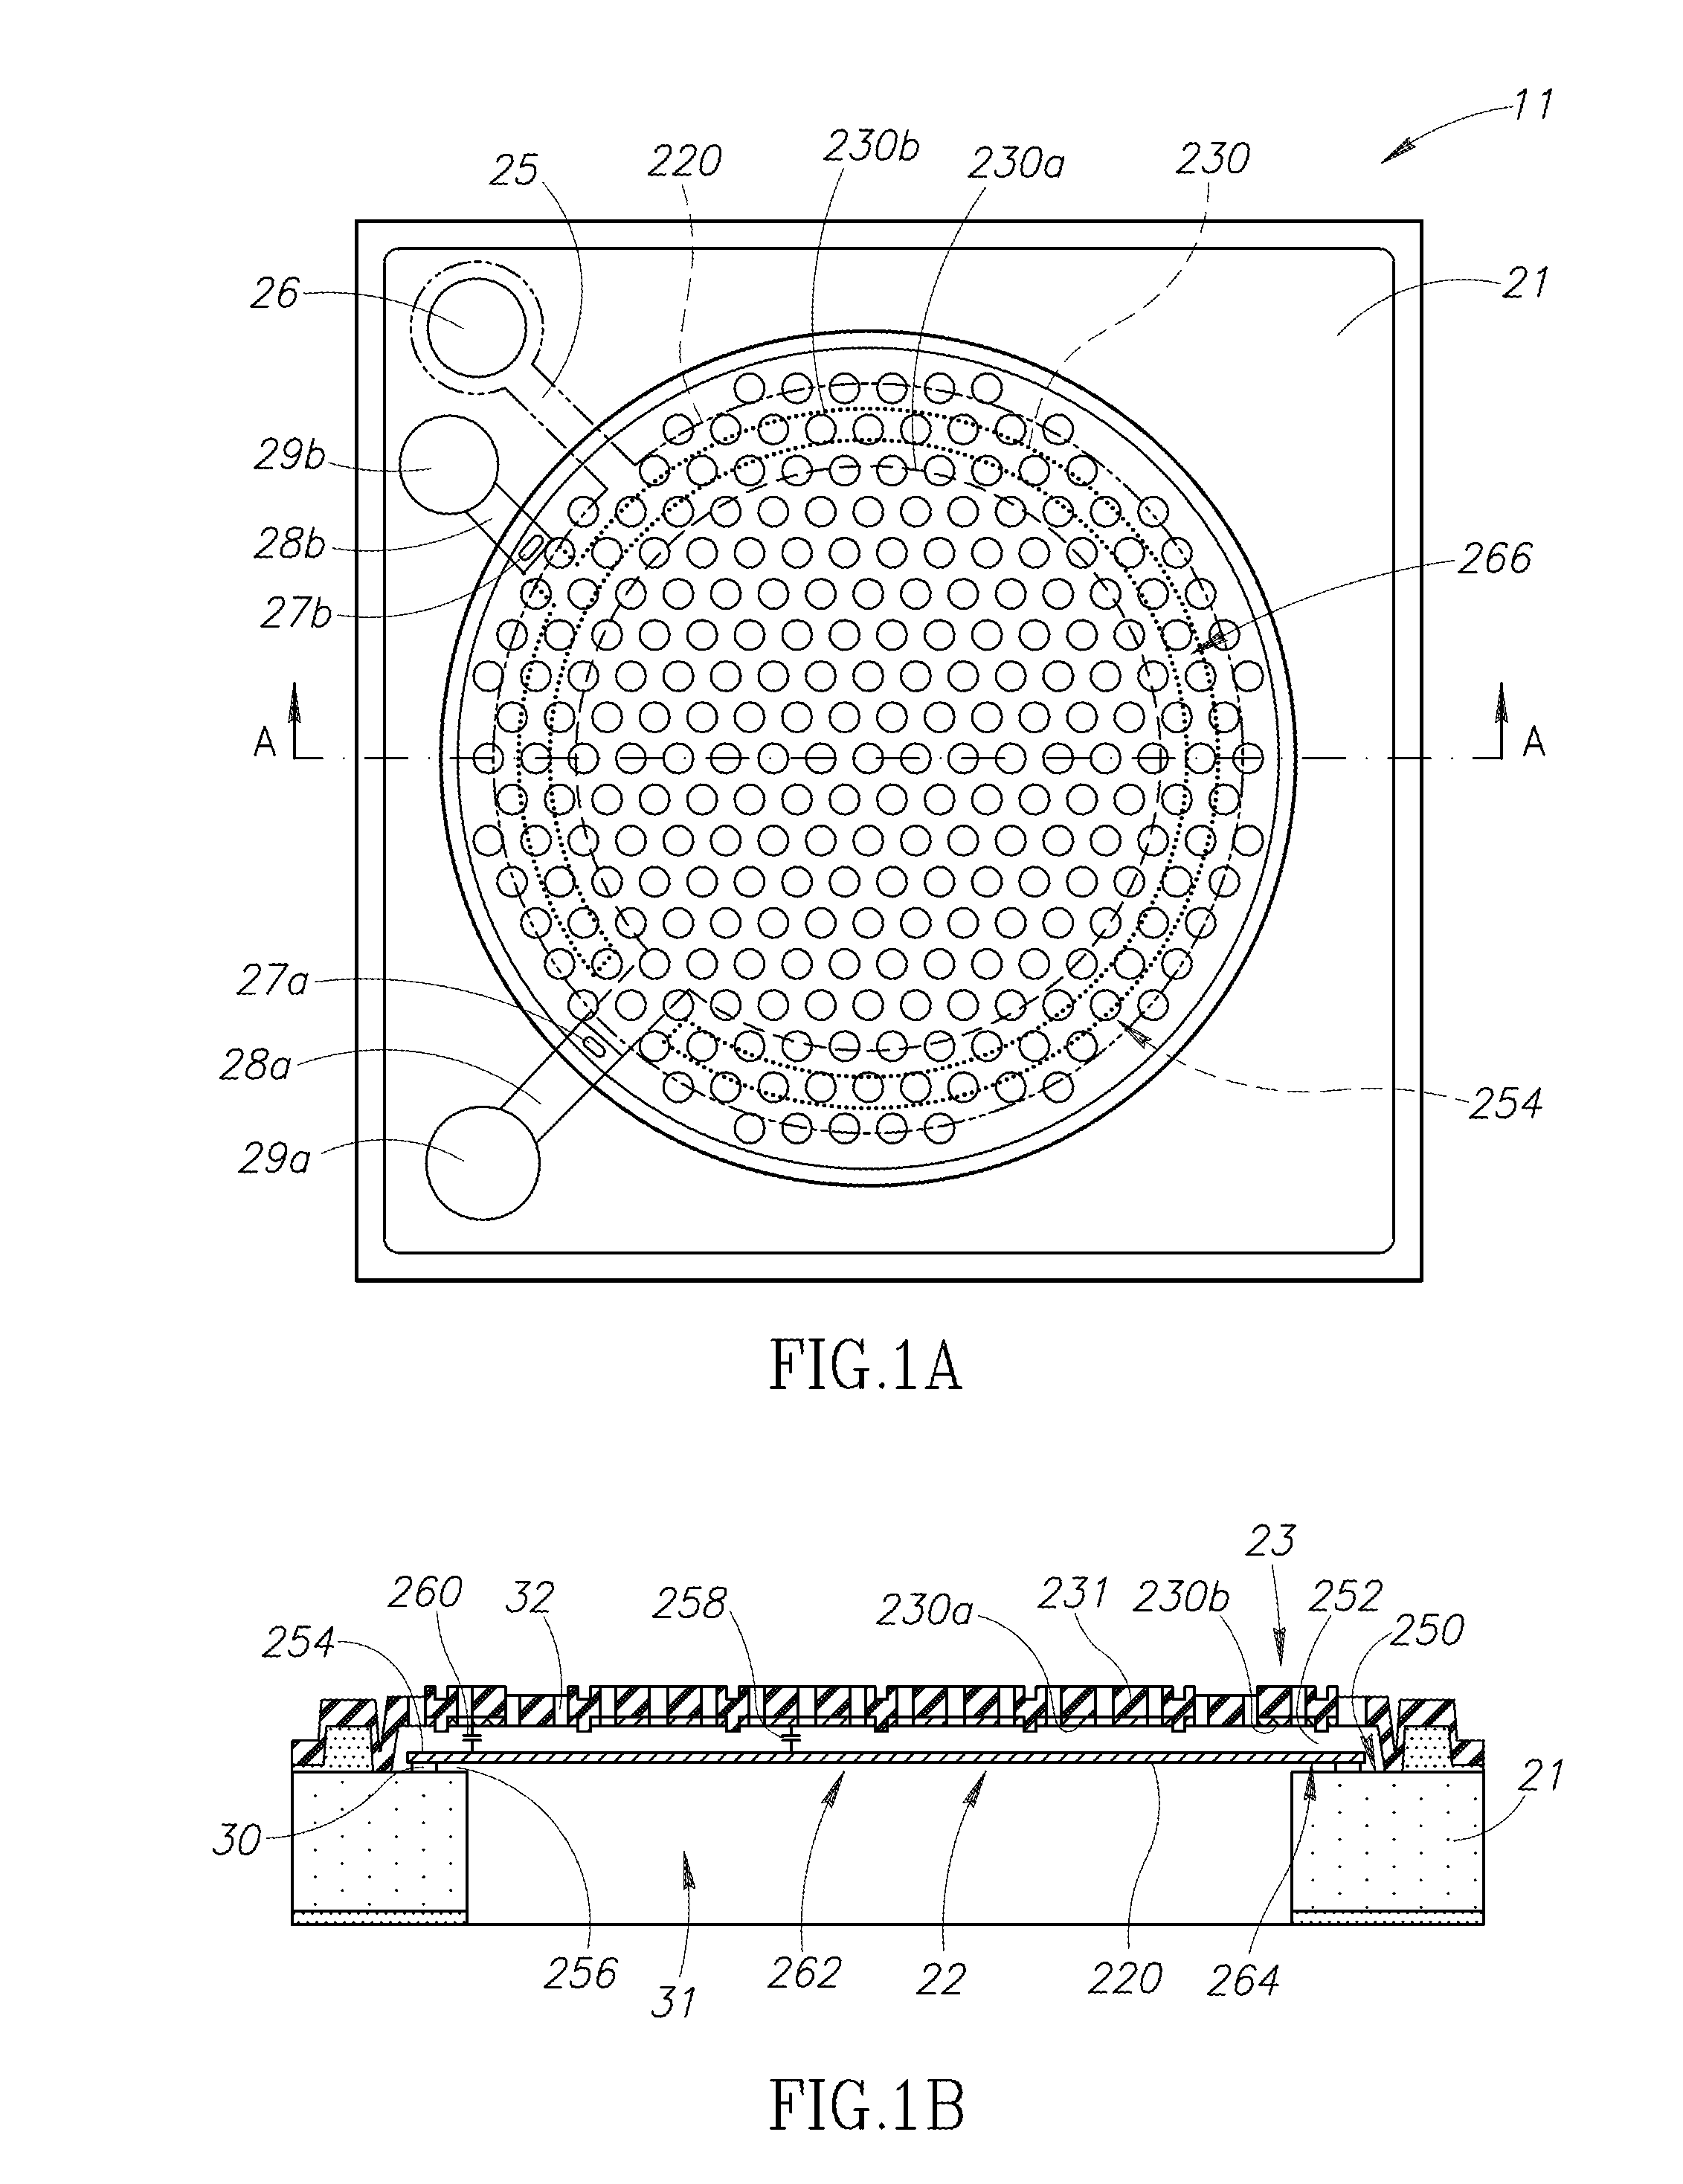 Acoustic transducer and interface circuit